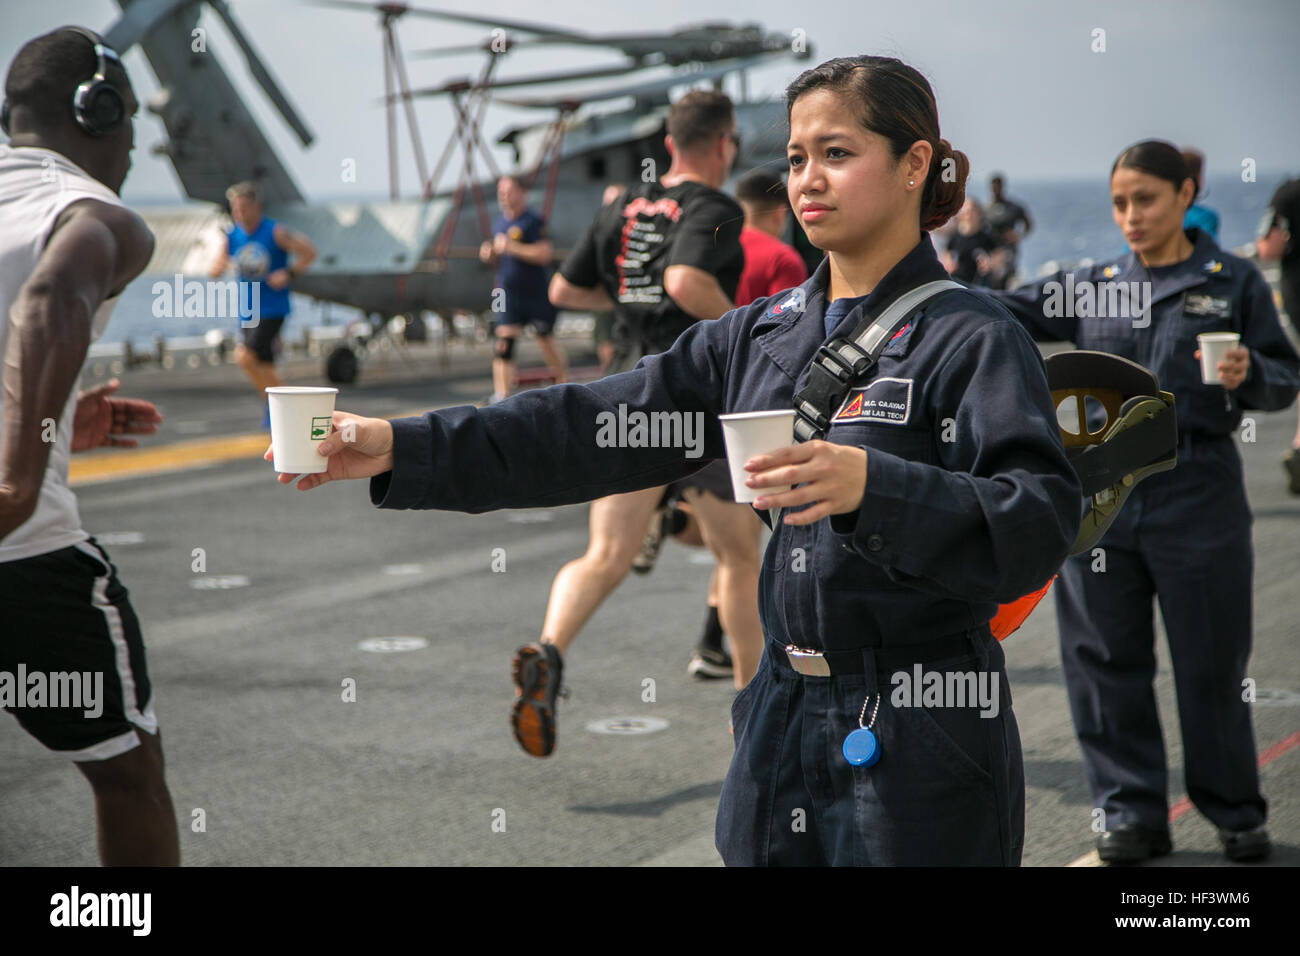 At sea. (March 27, 2016)-U.S. Sailor HM2 Charissa Caayao, with the 13th Marine Expeditionary Unit and Boxer Amphibious Ready Group team, hands out water to participants in a 5k run for women's history month, March 27, 2016, during the MEU's western pacific deployment aboard the USS Boxer. More then 4,500 Marines and Sailors from the Boxer ARG, 13th MEU team are currently transiting the Pacific Ocean toward the U.S. 5th fleet area of operations during a scheduled deployment. (U.S. Marine Corps photo by Sgt. Briauna Birl/RELEASED) Women's History 5k aboard USS Boxer 160327-M-KR317-130 Stock Photo